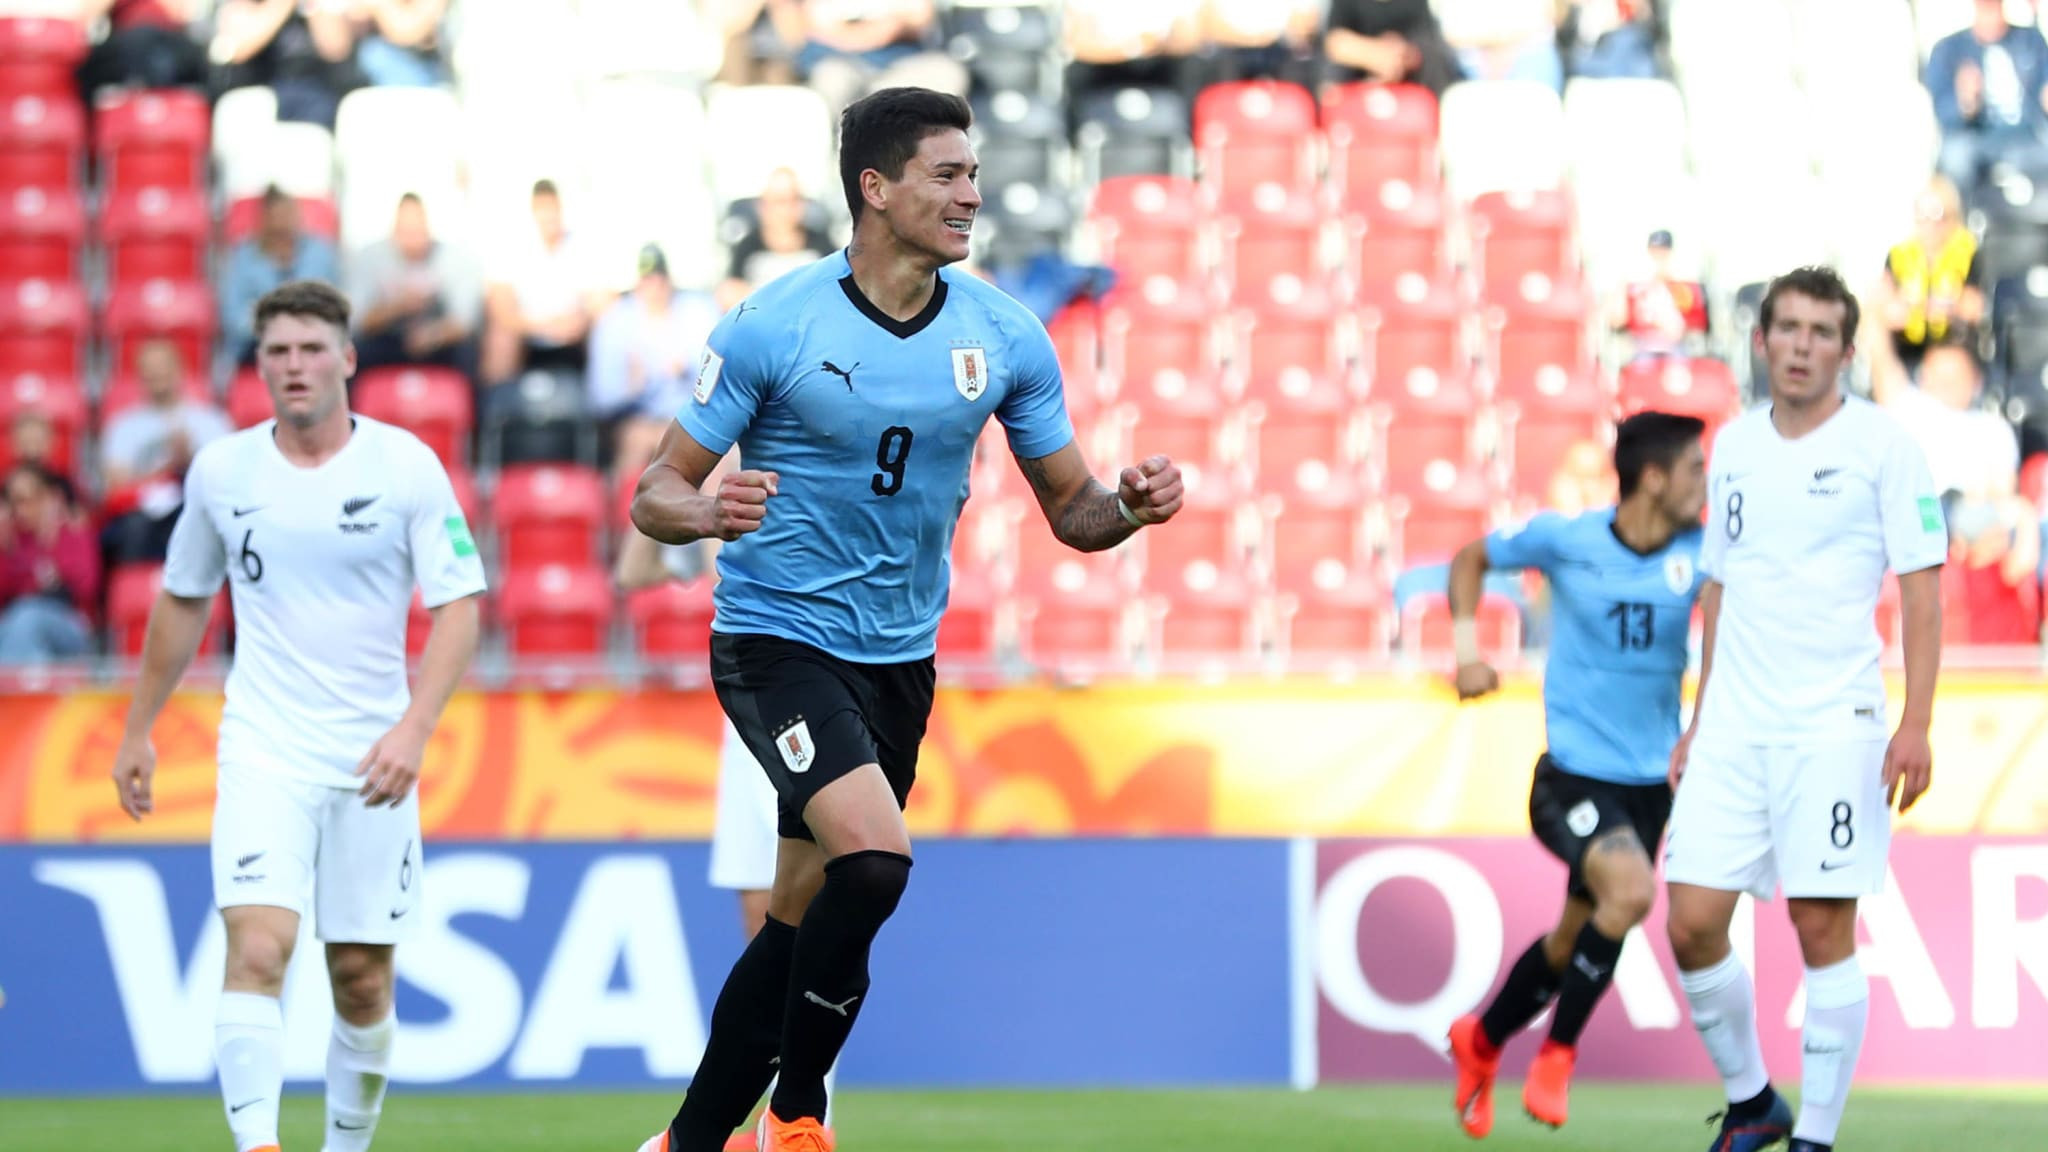 Uruguay ended Group C with a 100 per cent record after earning a 2-0 victory against New Zealand at the FIFA Under-20 World Cup in Poland ©Getty Images